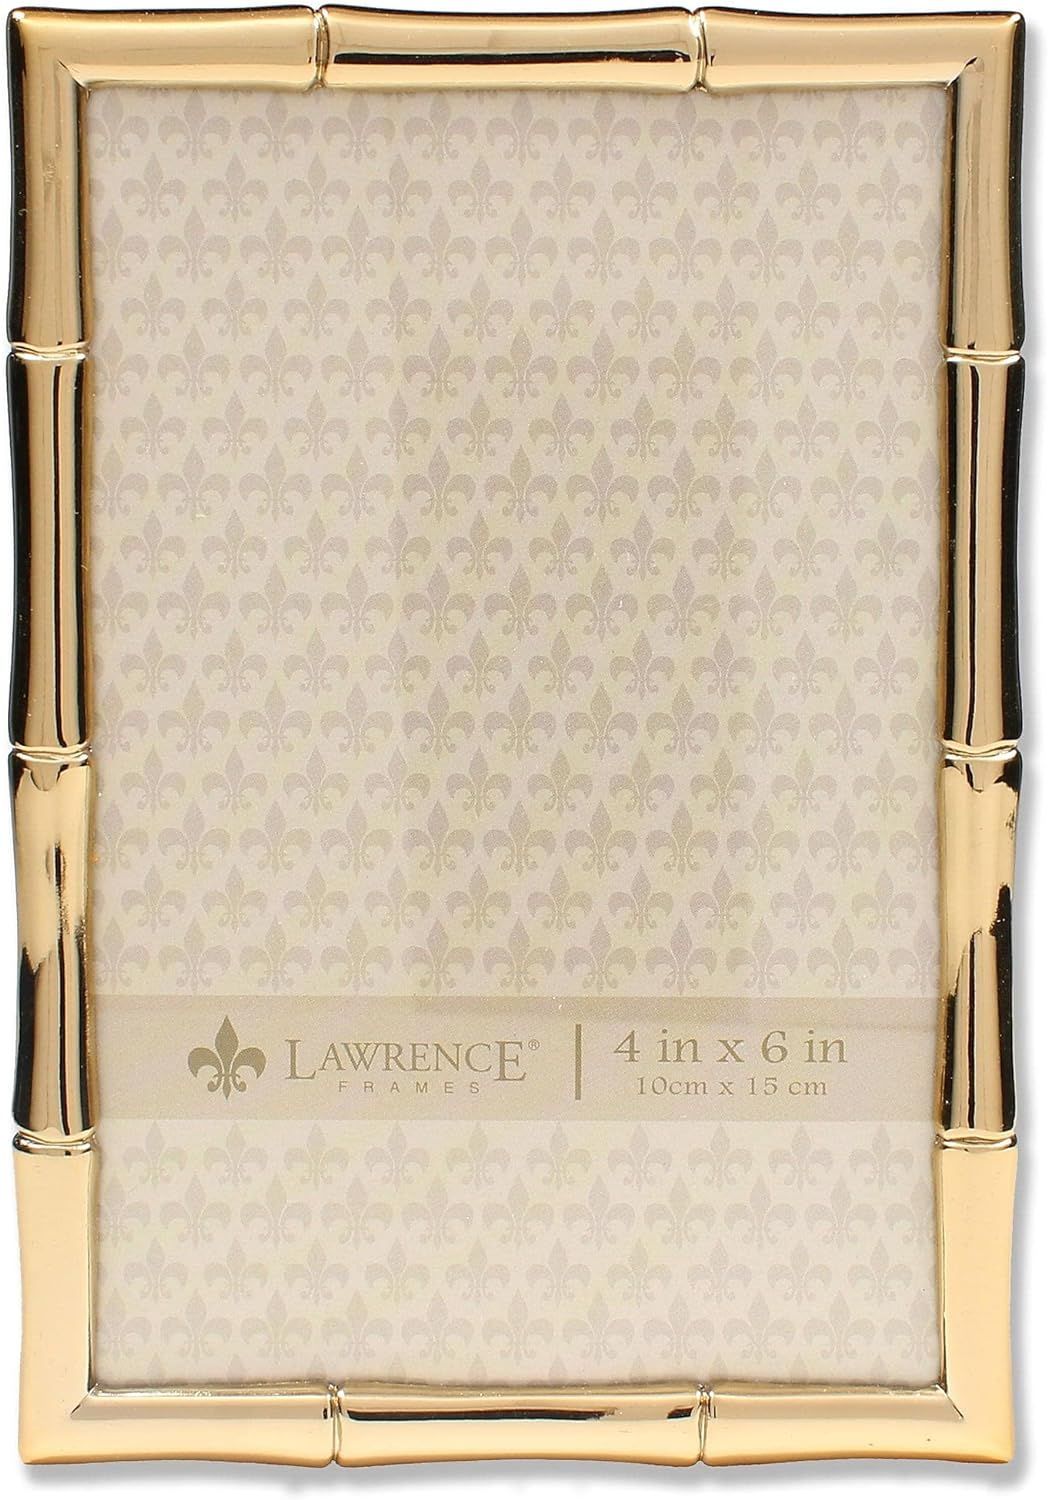 Lawrence 712246 4-Inch W x 6-Inch H Gold Metal Picture Frame with Bamboo Design | Amazon (US)